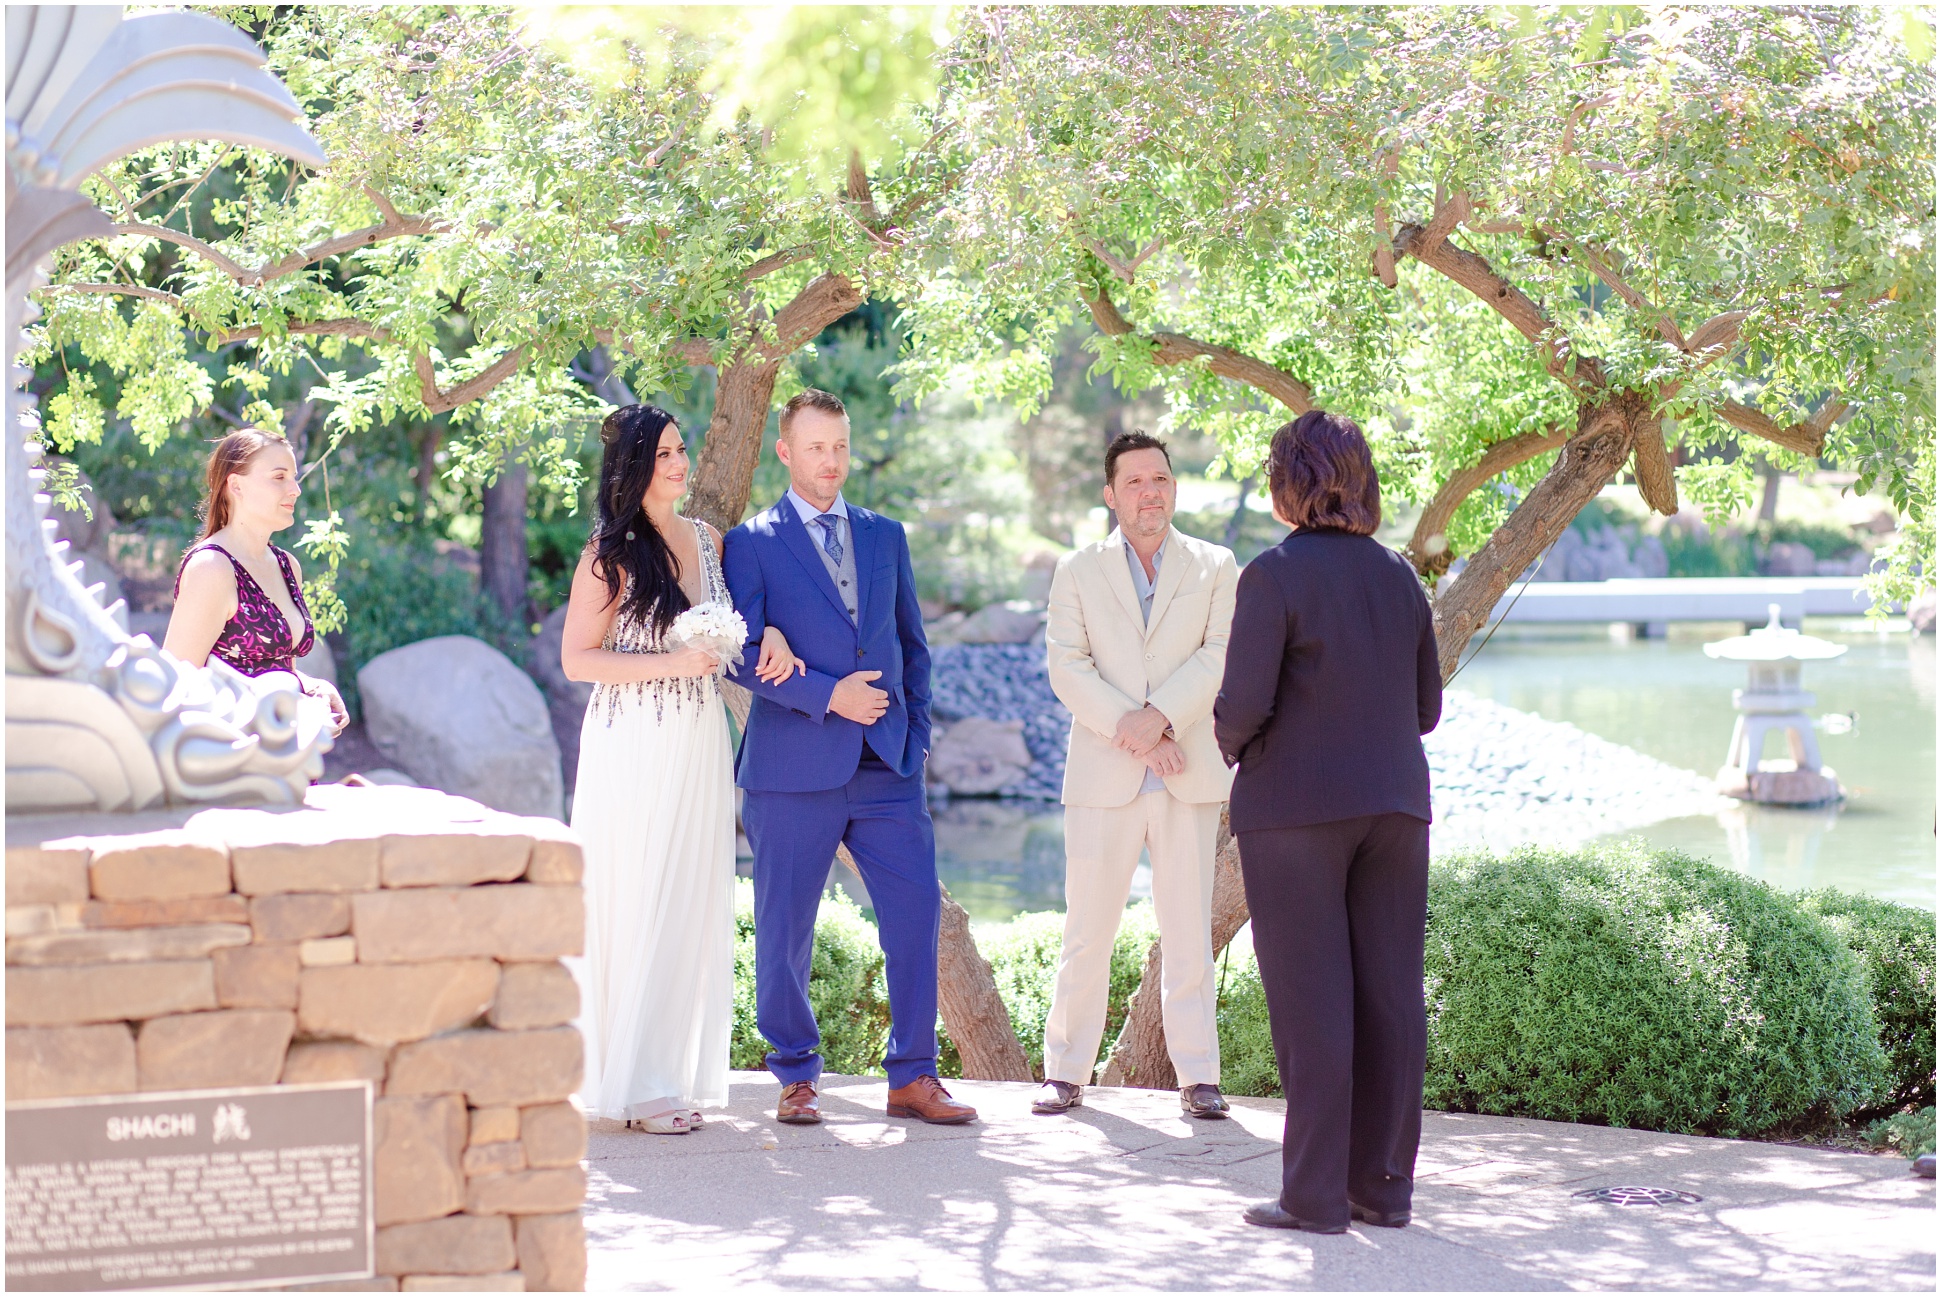 Ceremony for Holli and JB's Japanese Friendship Garden Elopement